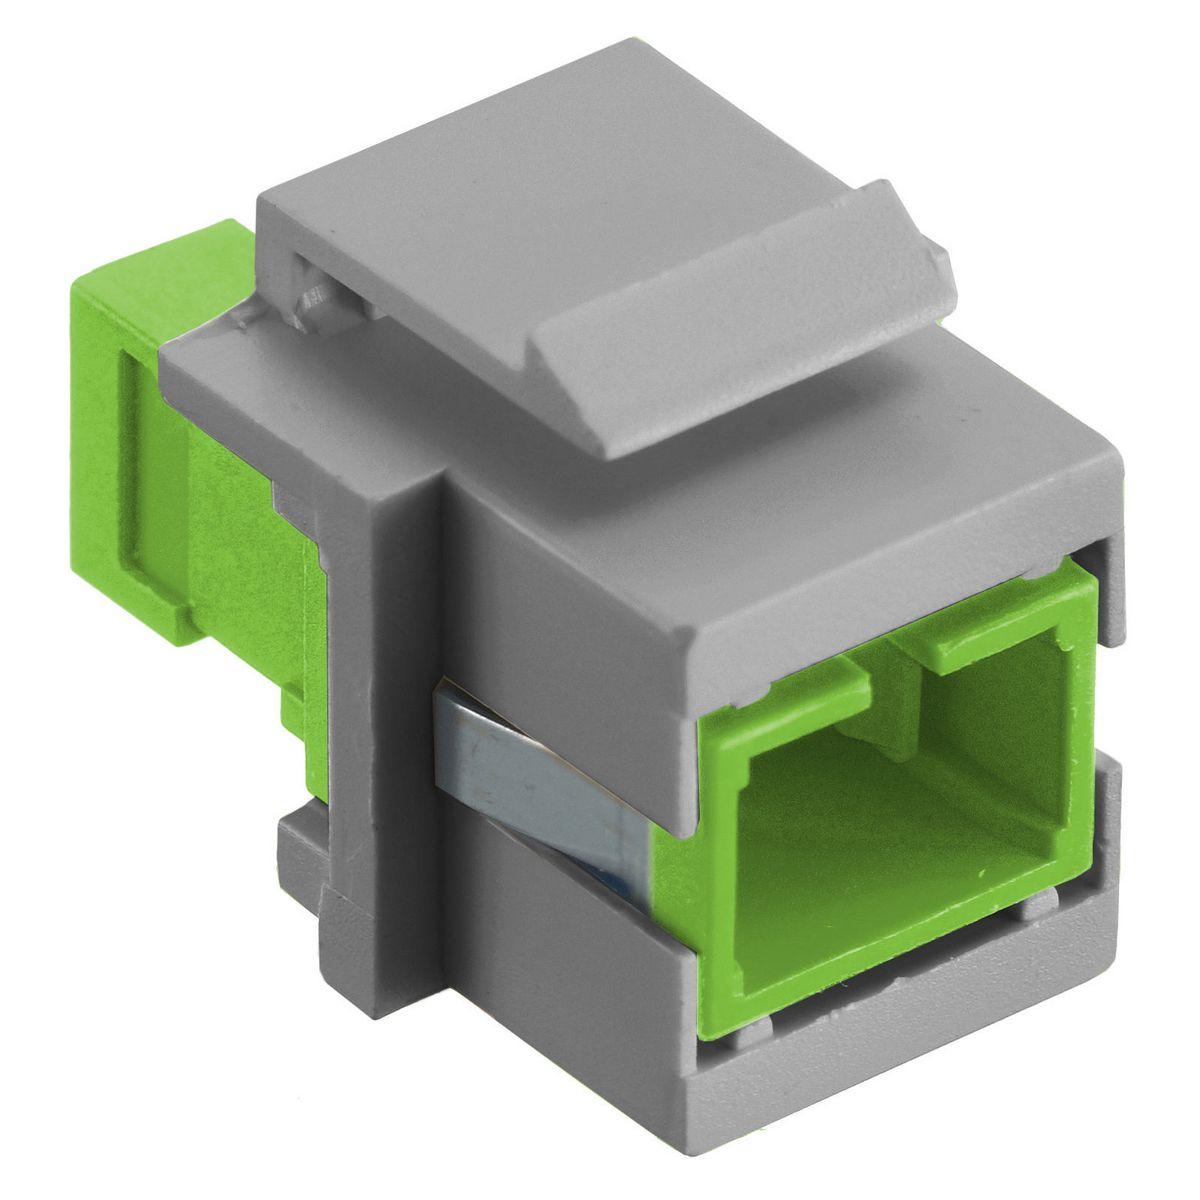 Hubbell SFFSCSGNG Fiber Optic Connectors, Snap-Fit,Flush, SC Simplex, Zircon Sleeves, Green, Gray Housing  ; Snap Fit ; Gray Housing ; Flush ; SC Simplex ; Green Adapter ; Standard Product